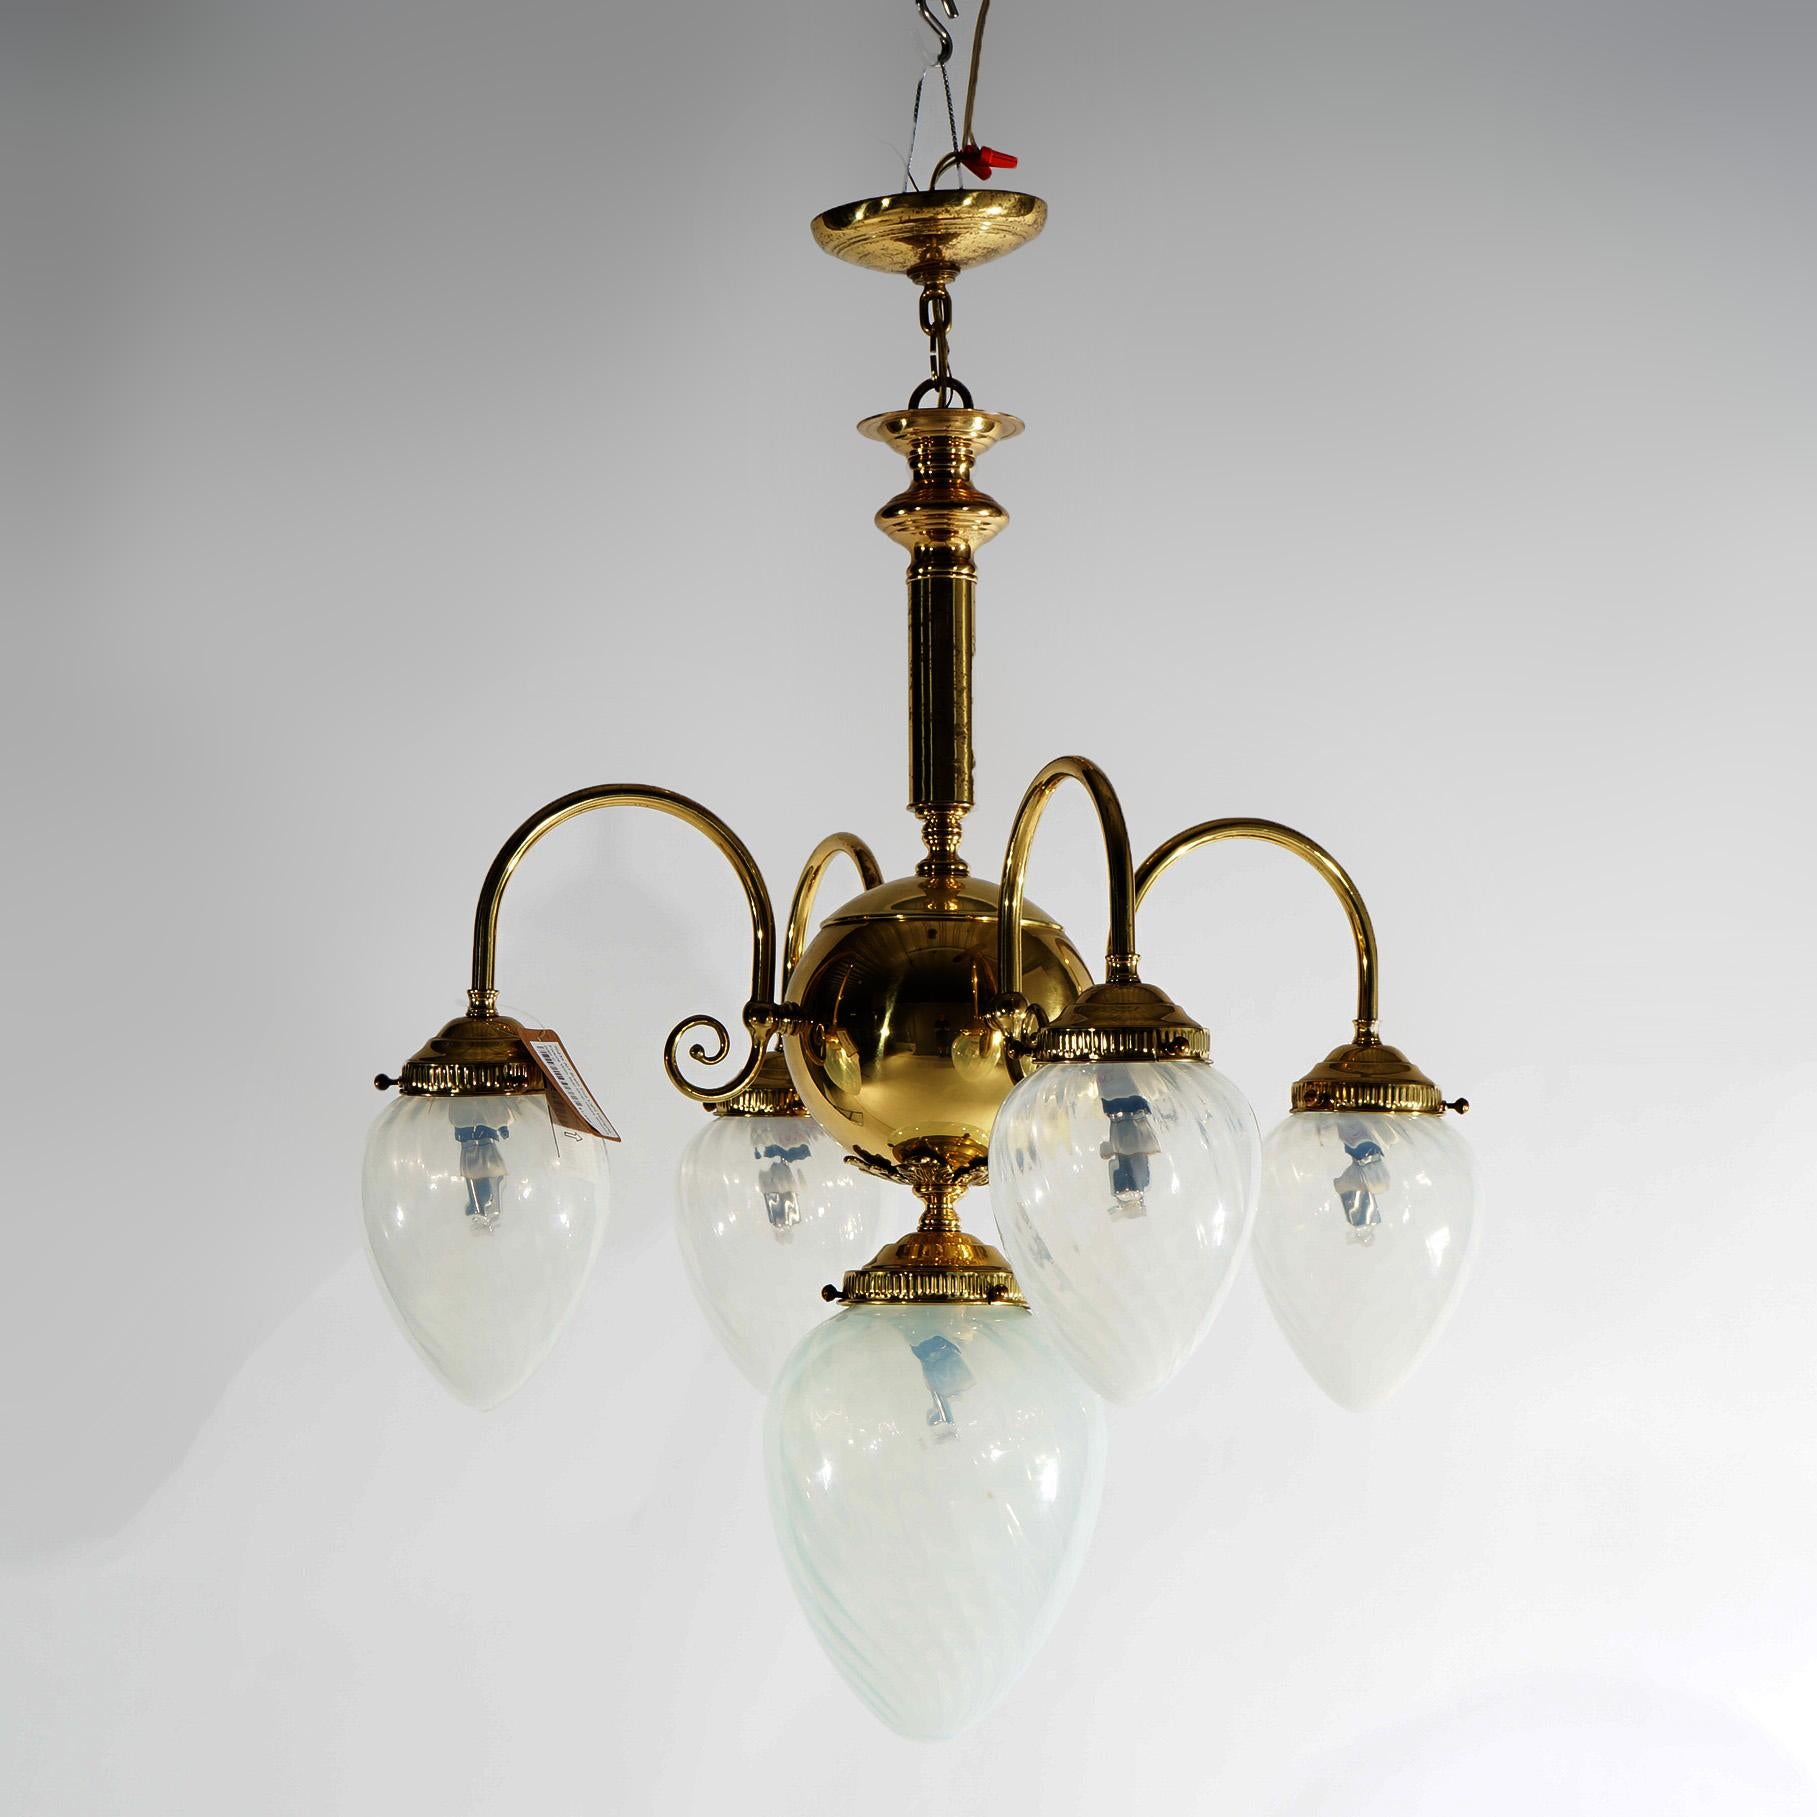 A drop-light chandelier offers brass construction with central light having oversized swirl tear form glass shade and four scroll form arms terminating in smaller matching swirl tear form glass shades, 20th century

Measures - 33